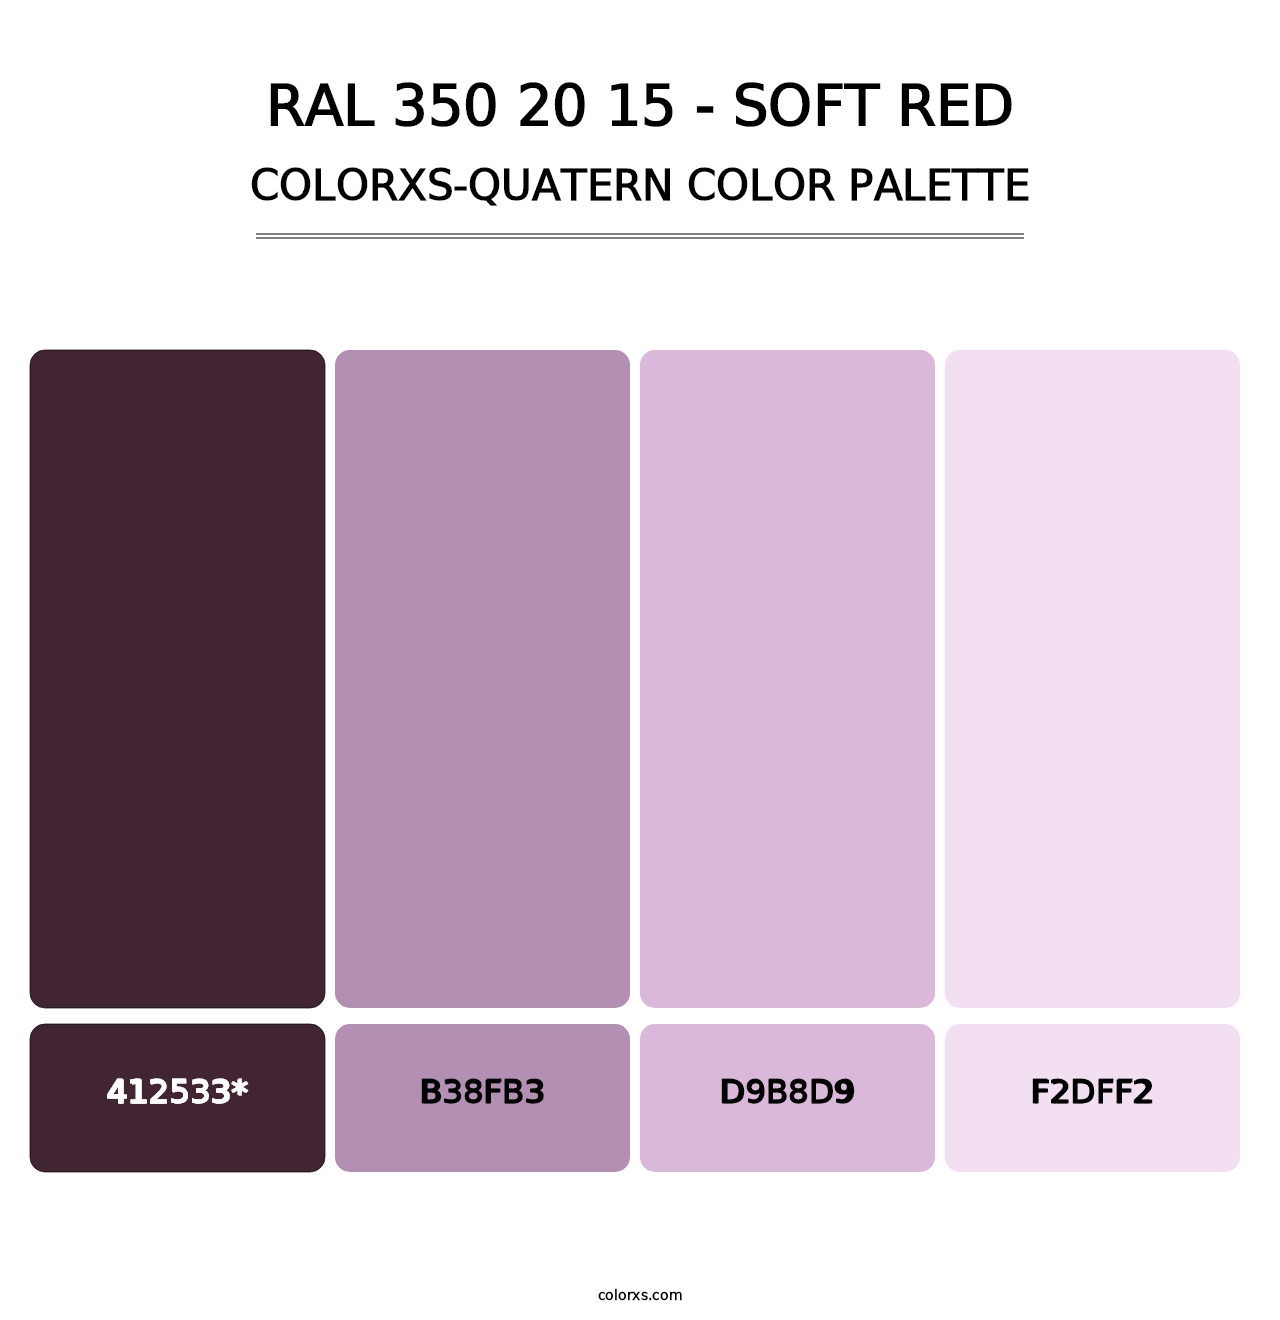 RAL 350 20 15 - Soft Red - Colorxs Quatern Palette